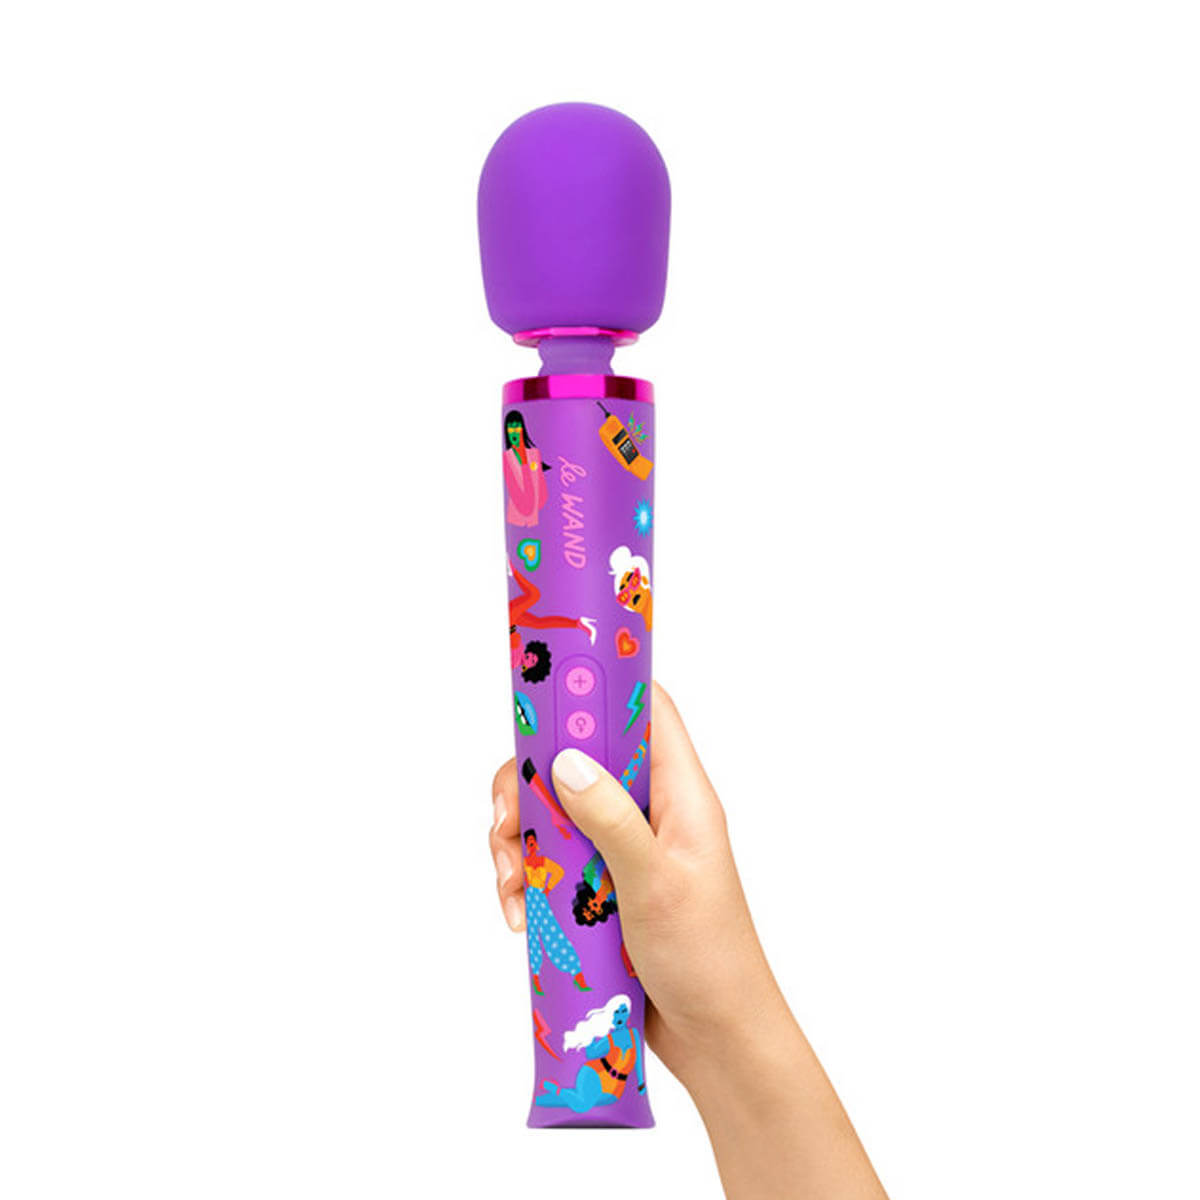 Woman's hand holding a Le Wand purple personal massager with empowering illustrations by artist Jade Purple Brown Nudie Co